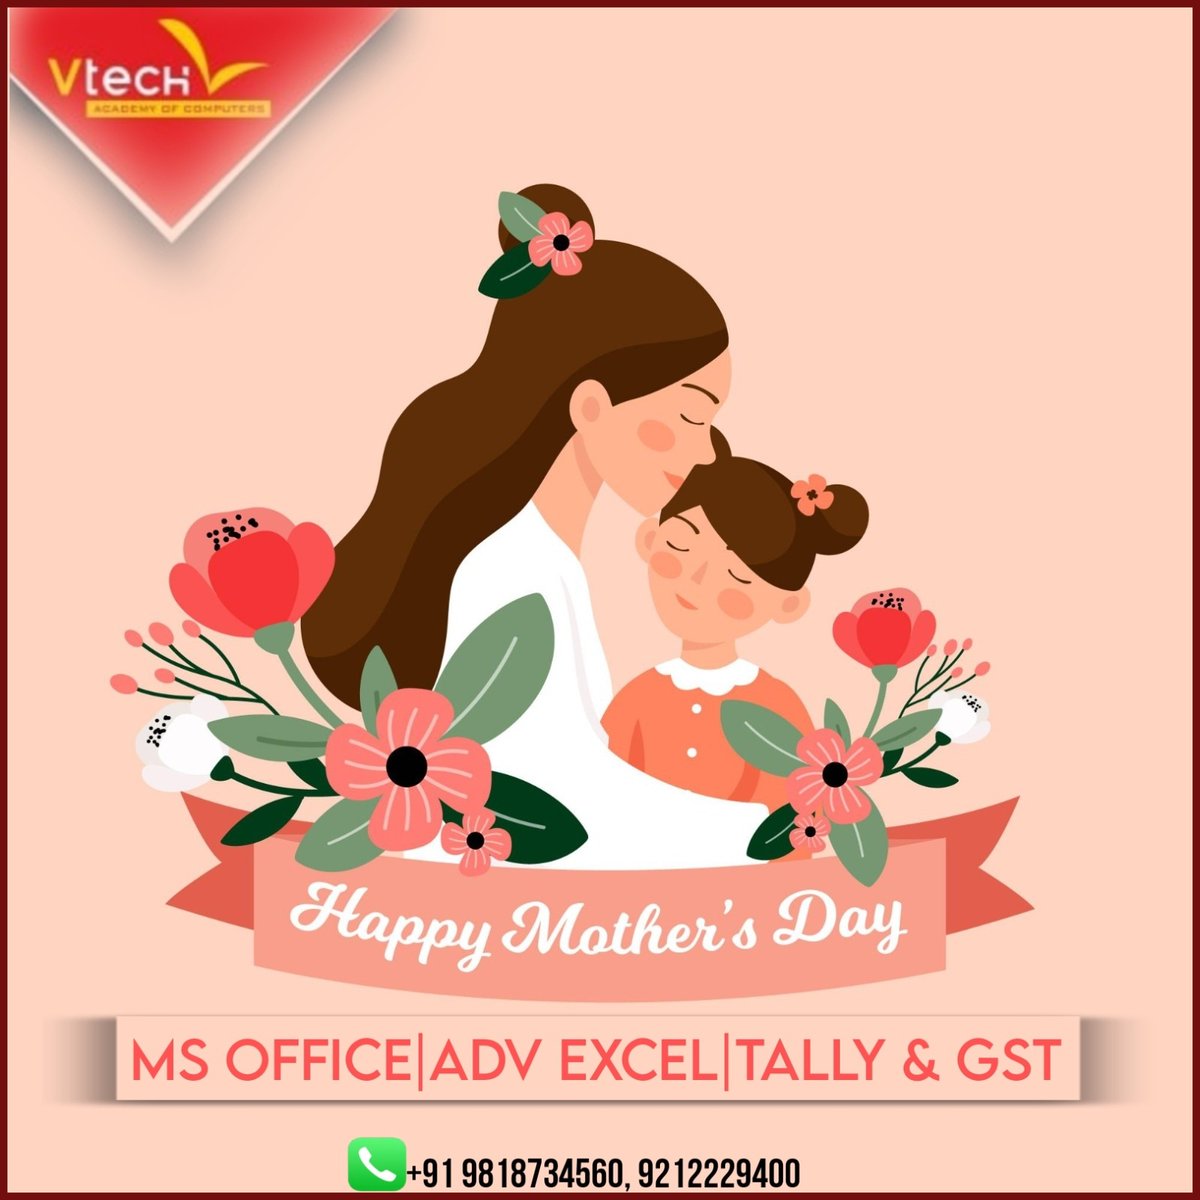 Wishing a very happy Mother's Day to all Mom who are Beautiful, strong, and kind.Thank you for being such a wonderful role model
. 
. 
#HappyMothersDayWishes #mothersday